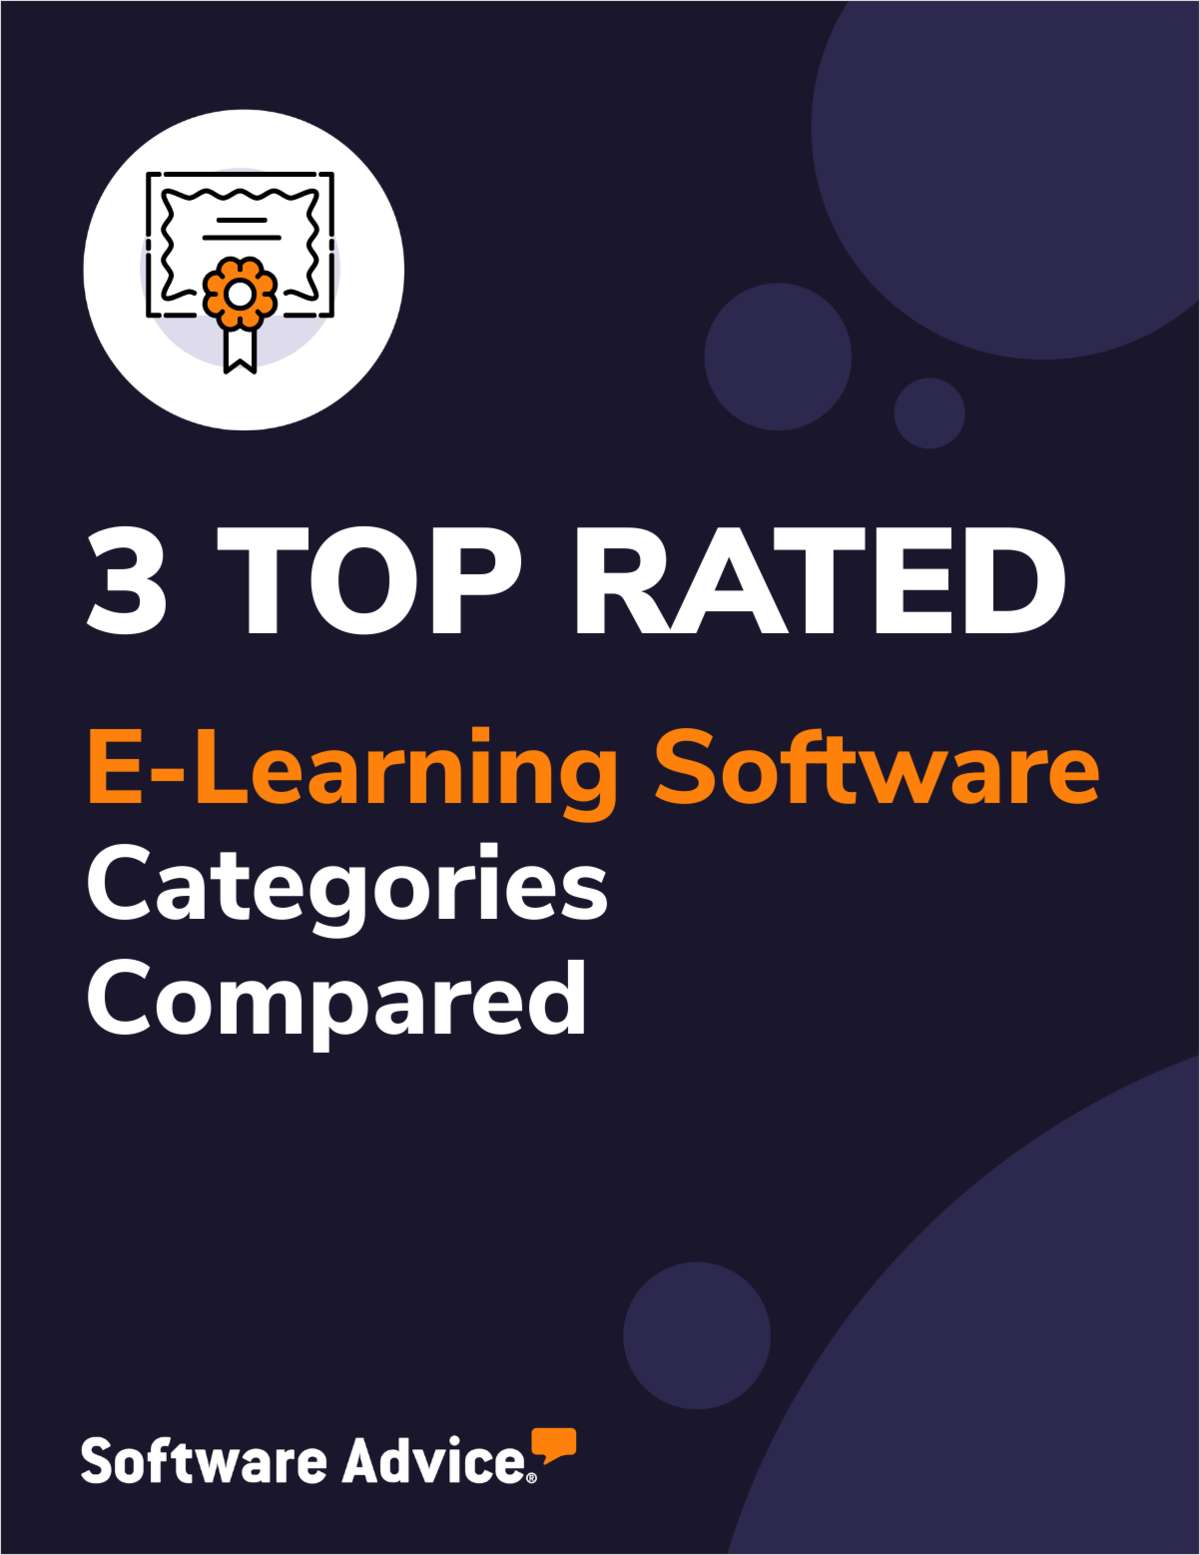 3 Top-Rated E-Learning Software Categories Compared